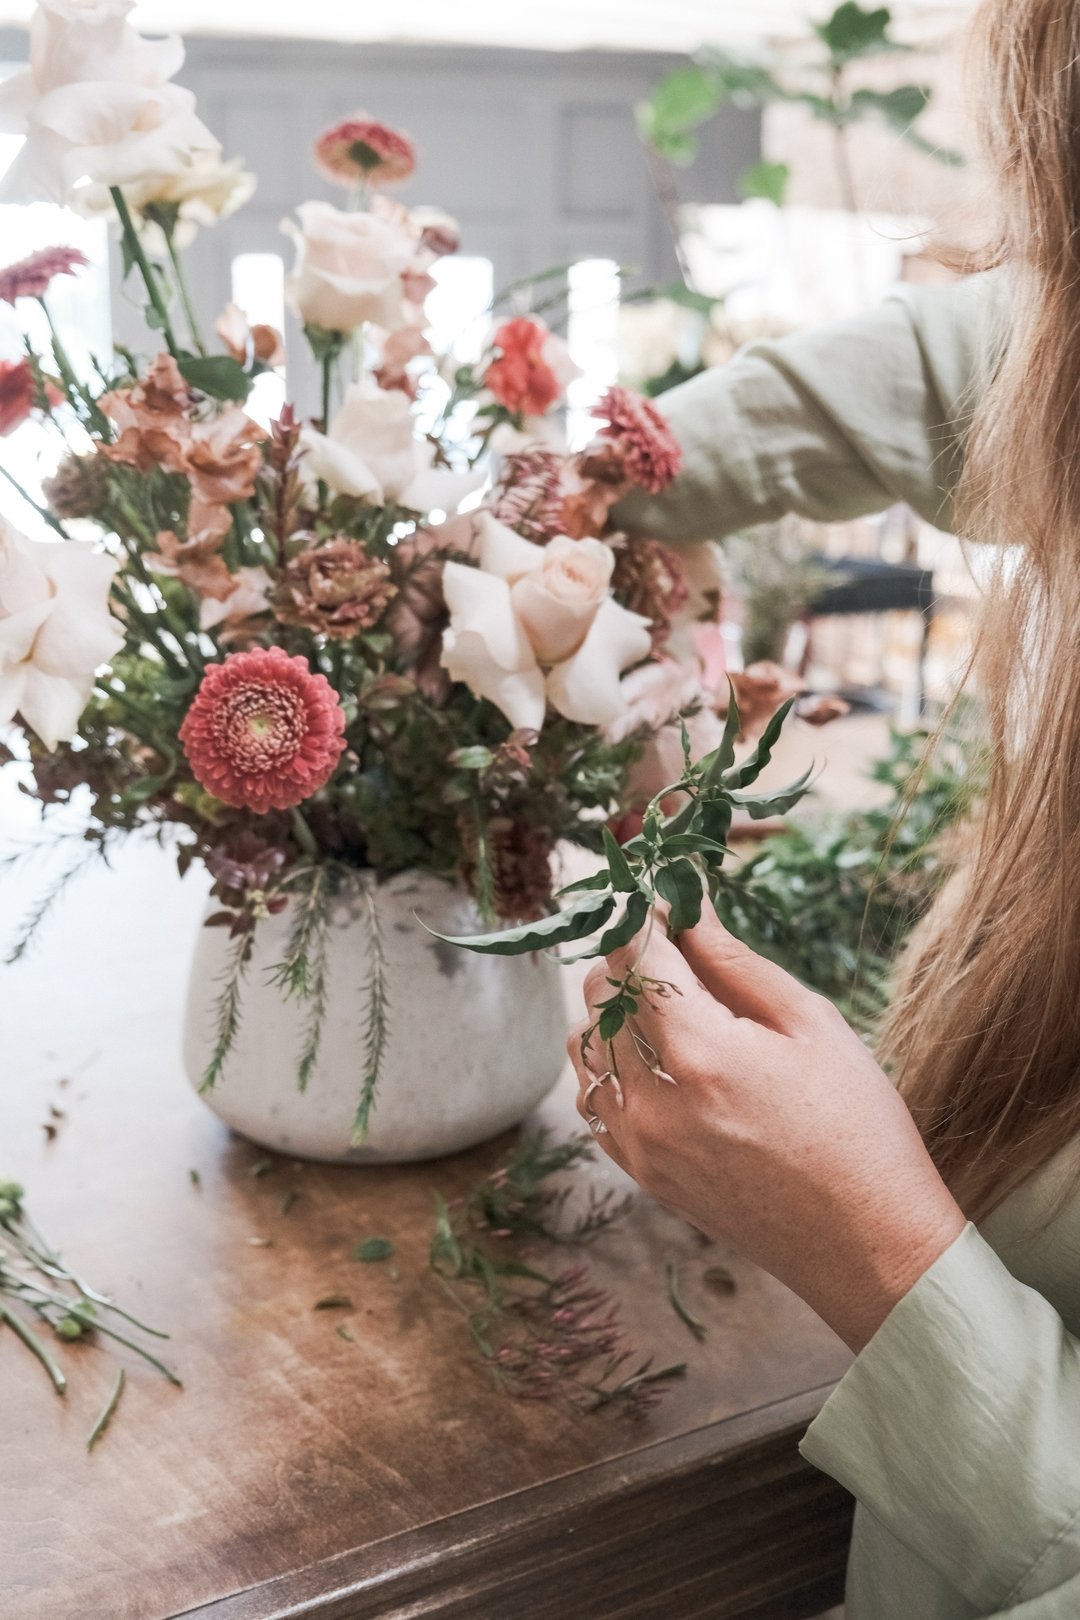 Next weeks flower arranging class is an all pink and white theme! 
We have a couple of seats left so if you&rsquo;re interested in joining make sure your save your spot! Link in bio!